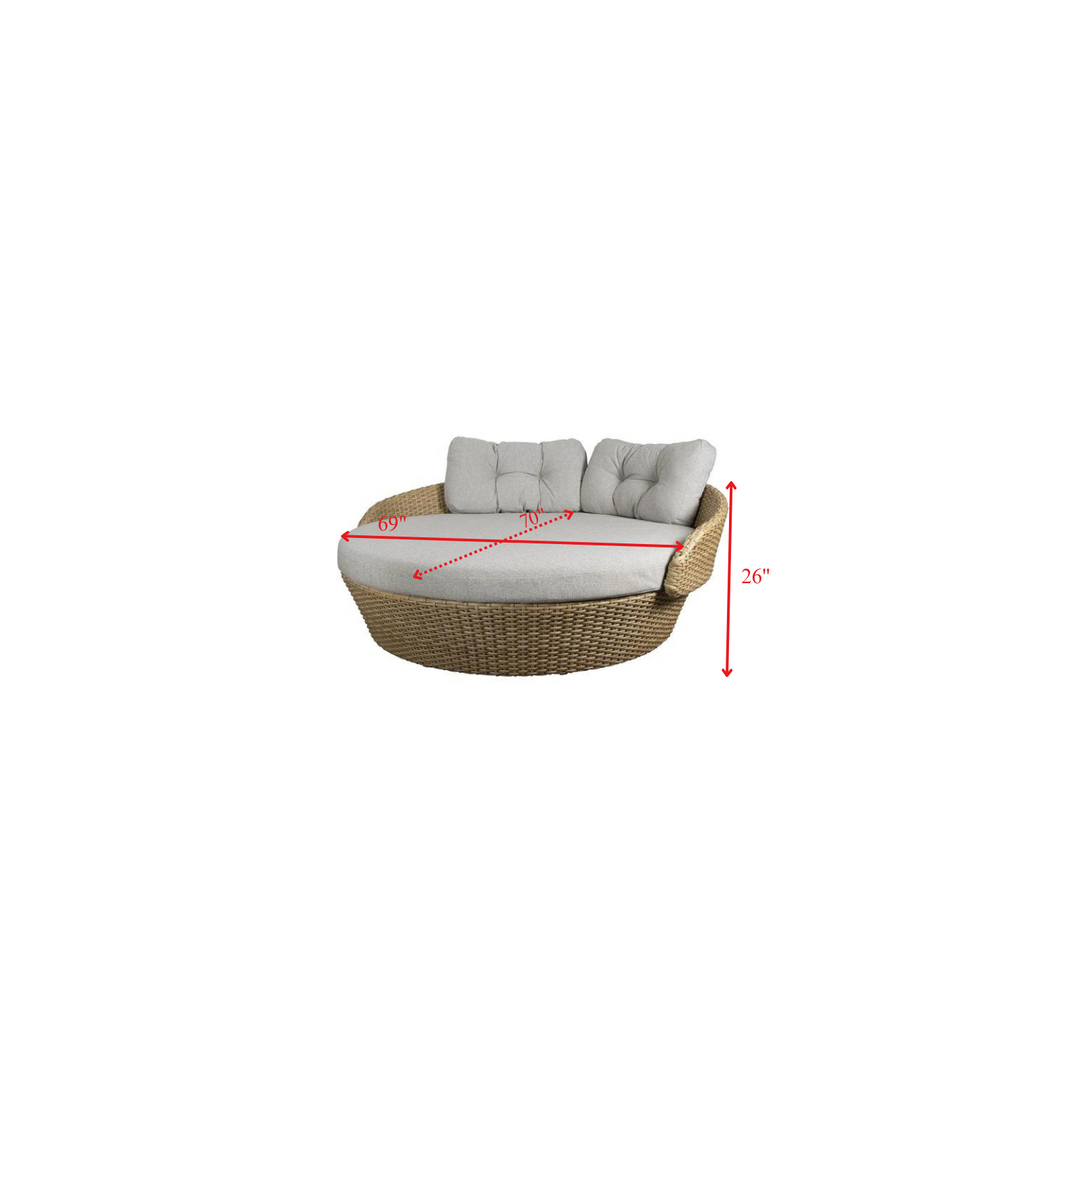 Borroni Outdoor Poolside Sunbed With Cushion Daybed (Honey Brown)